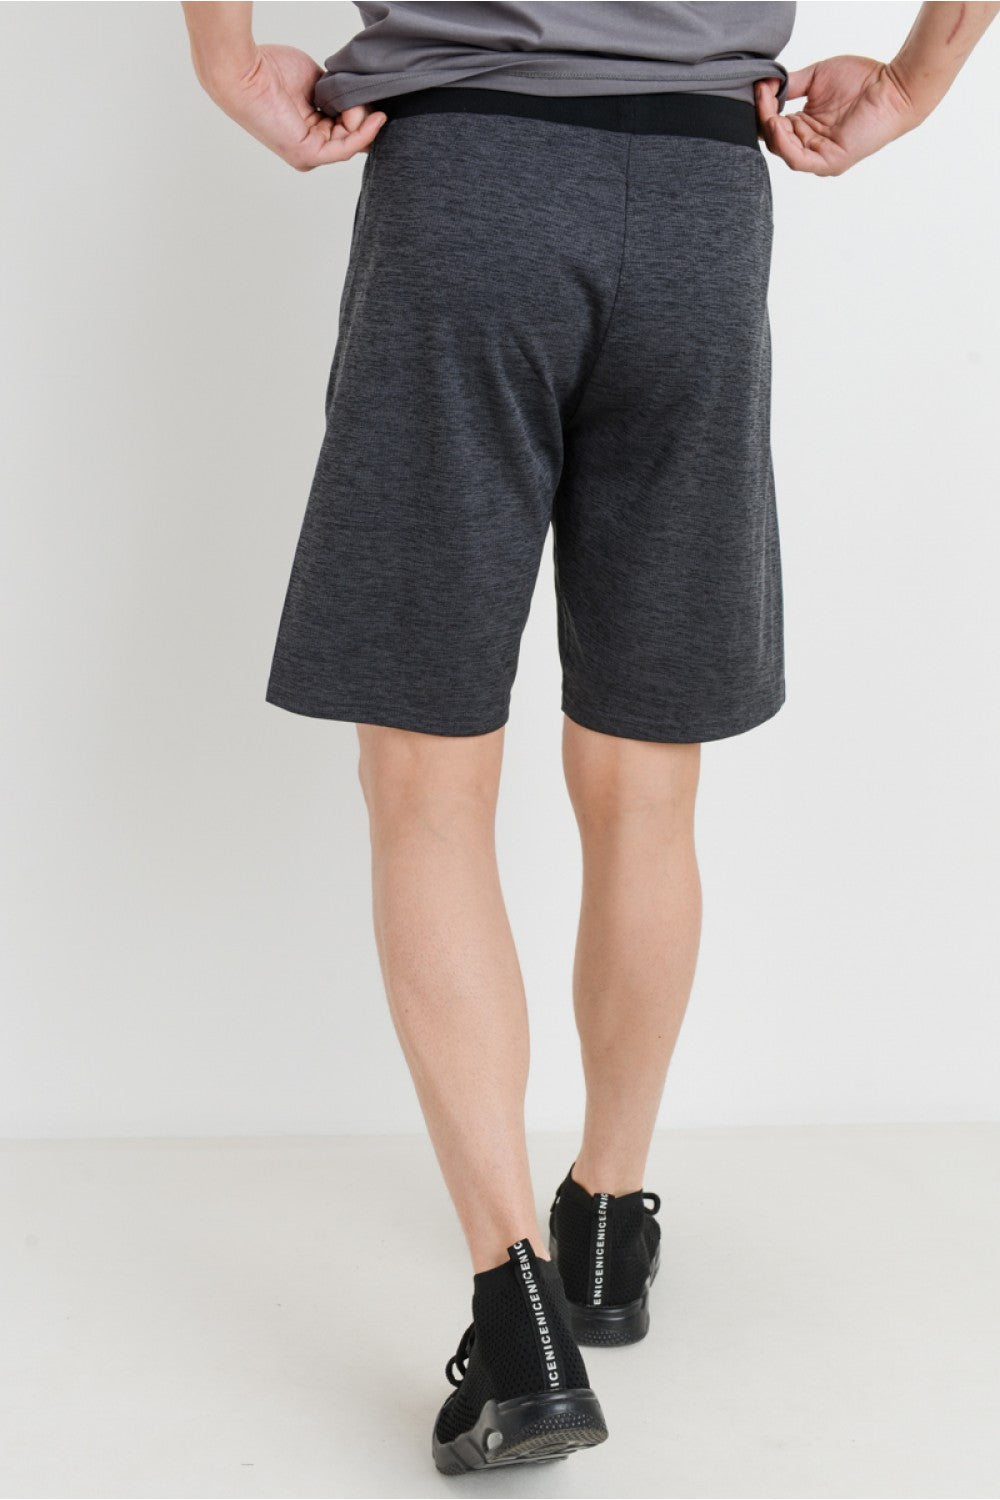 Athleisure Shorts with Zippered Pockets